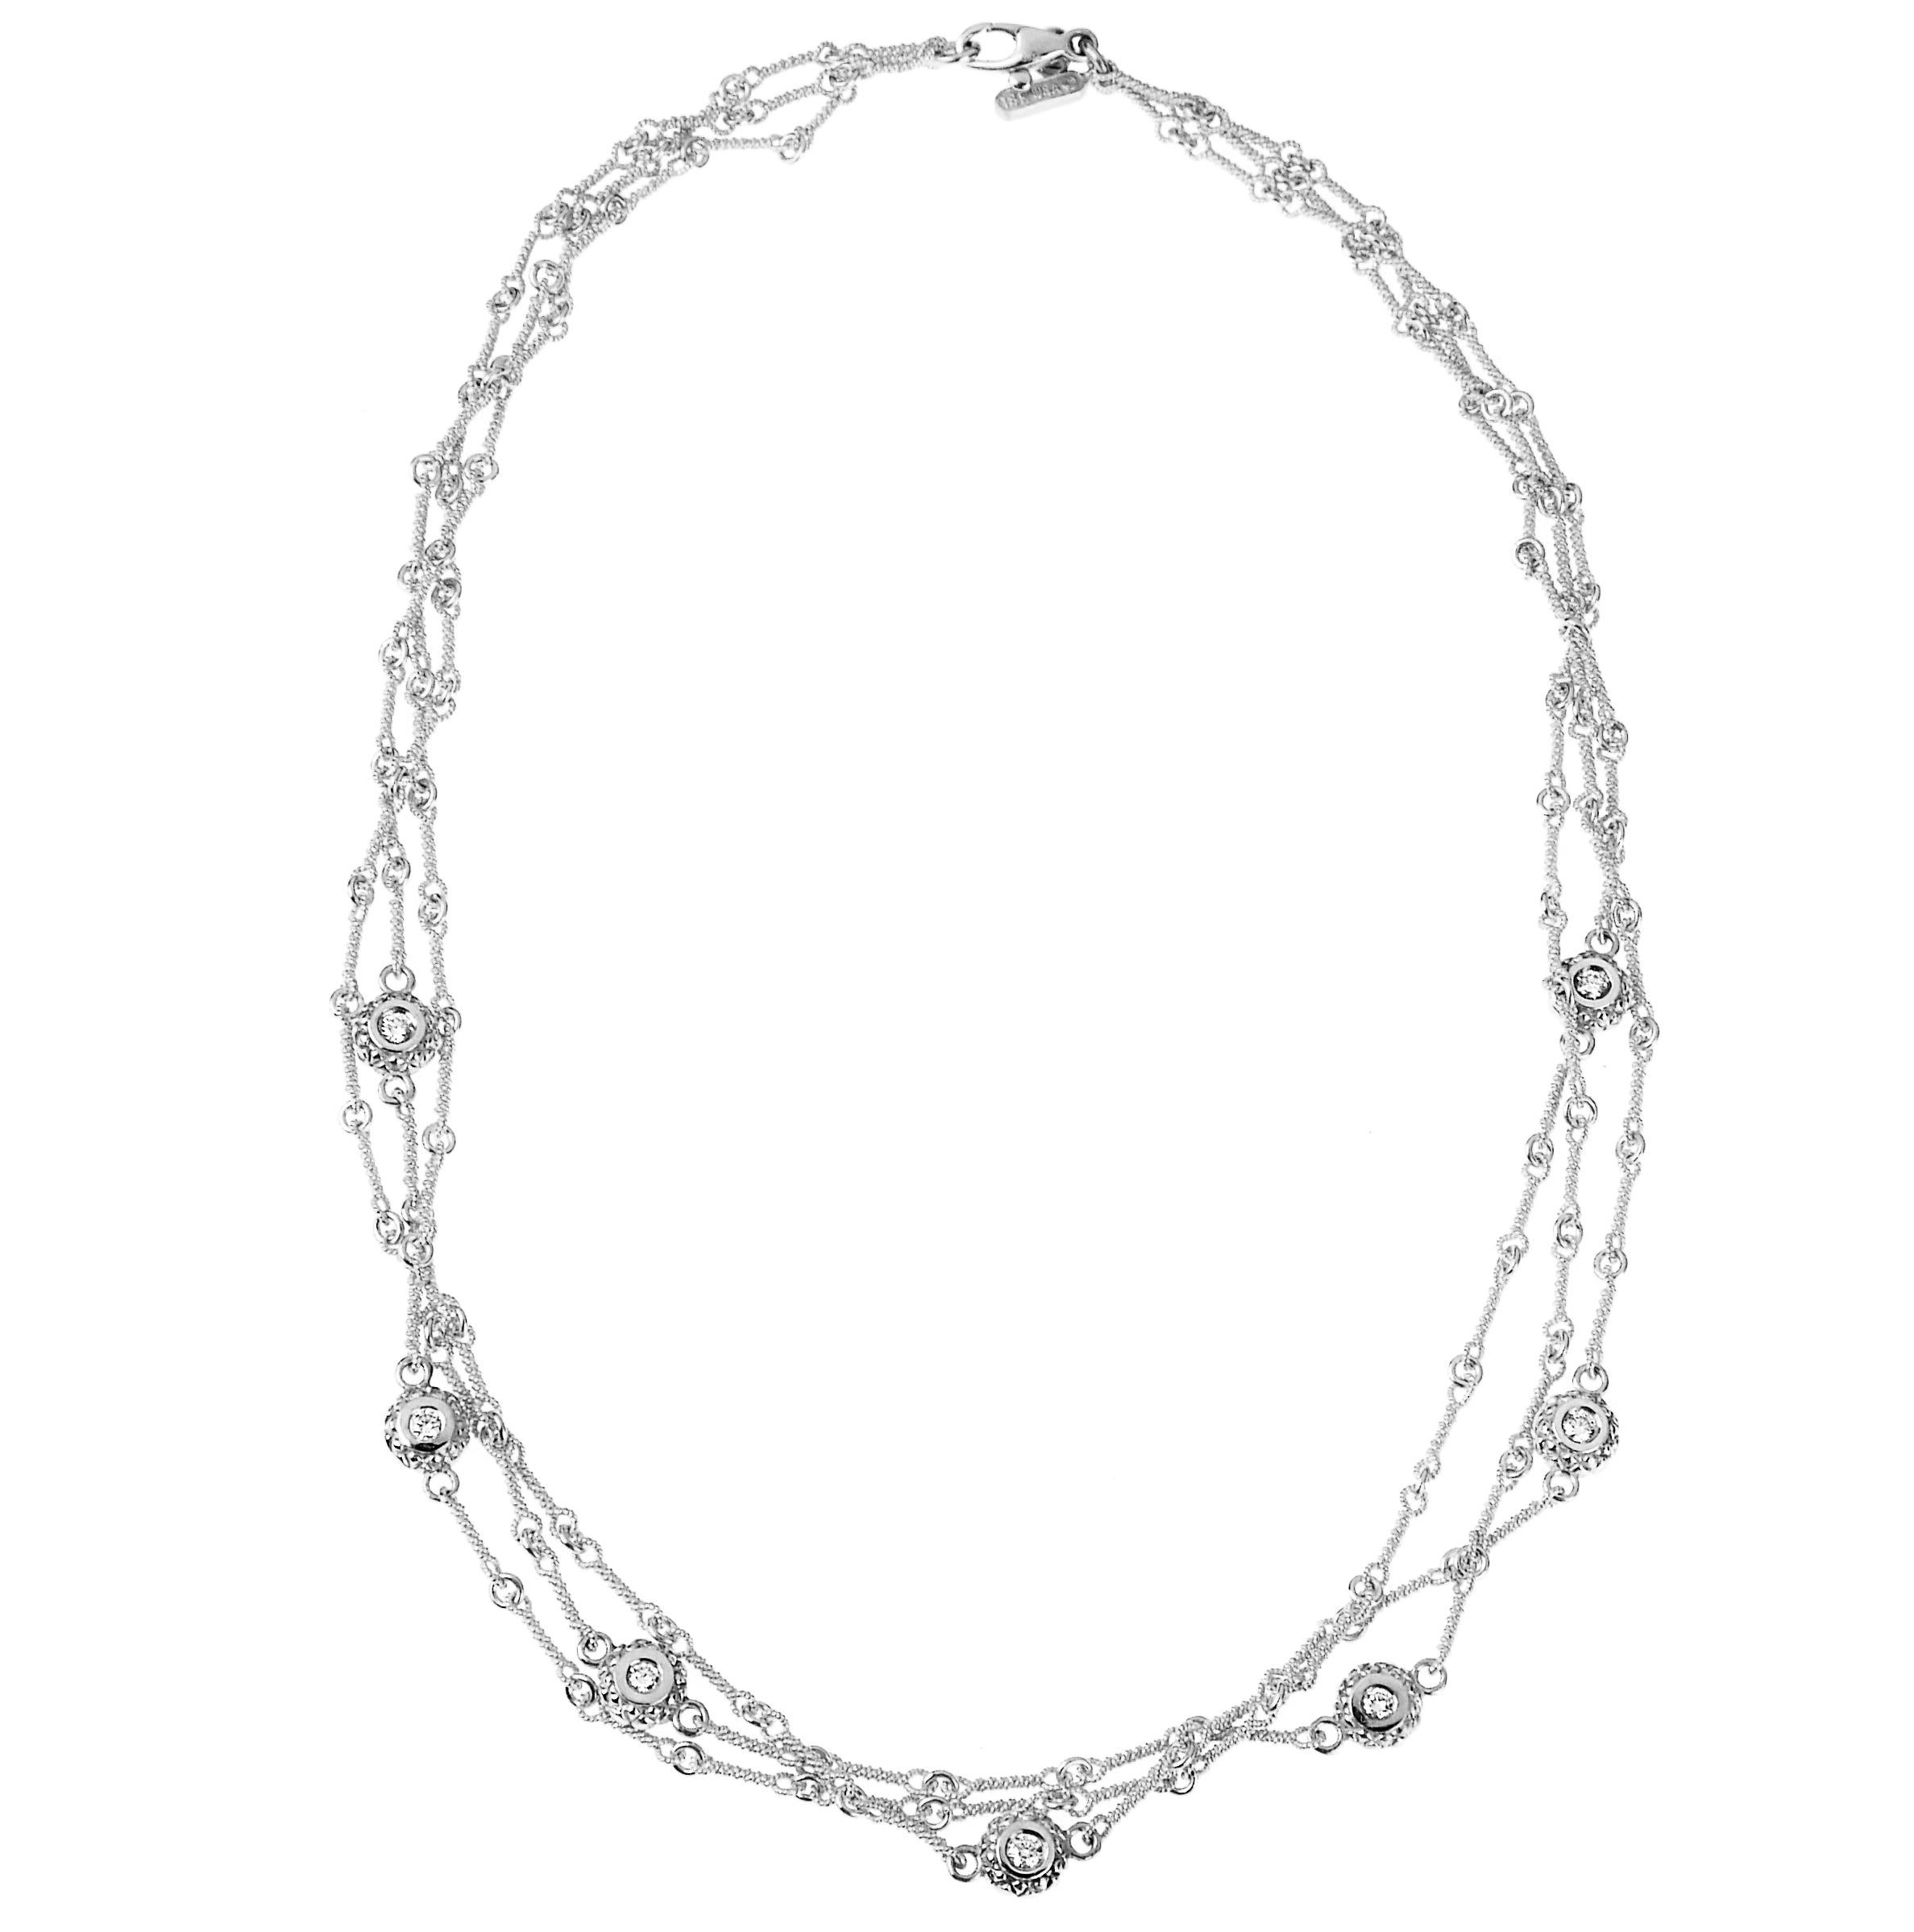 IF YOU ARE REALLY INTERESTED, CONTACT US WITH ANY REASONABLE OFFER. WE WILL TRY OUR BEST TO MAKE YOU HAPPY!

18K White Gold Handmade Chain Necklace with Double-Sided Diamond Bezels by Stambolian

Seven double-sided diamond bezels are on this